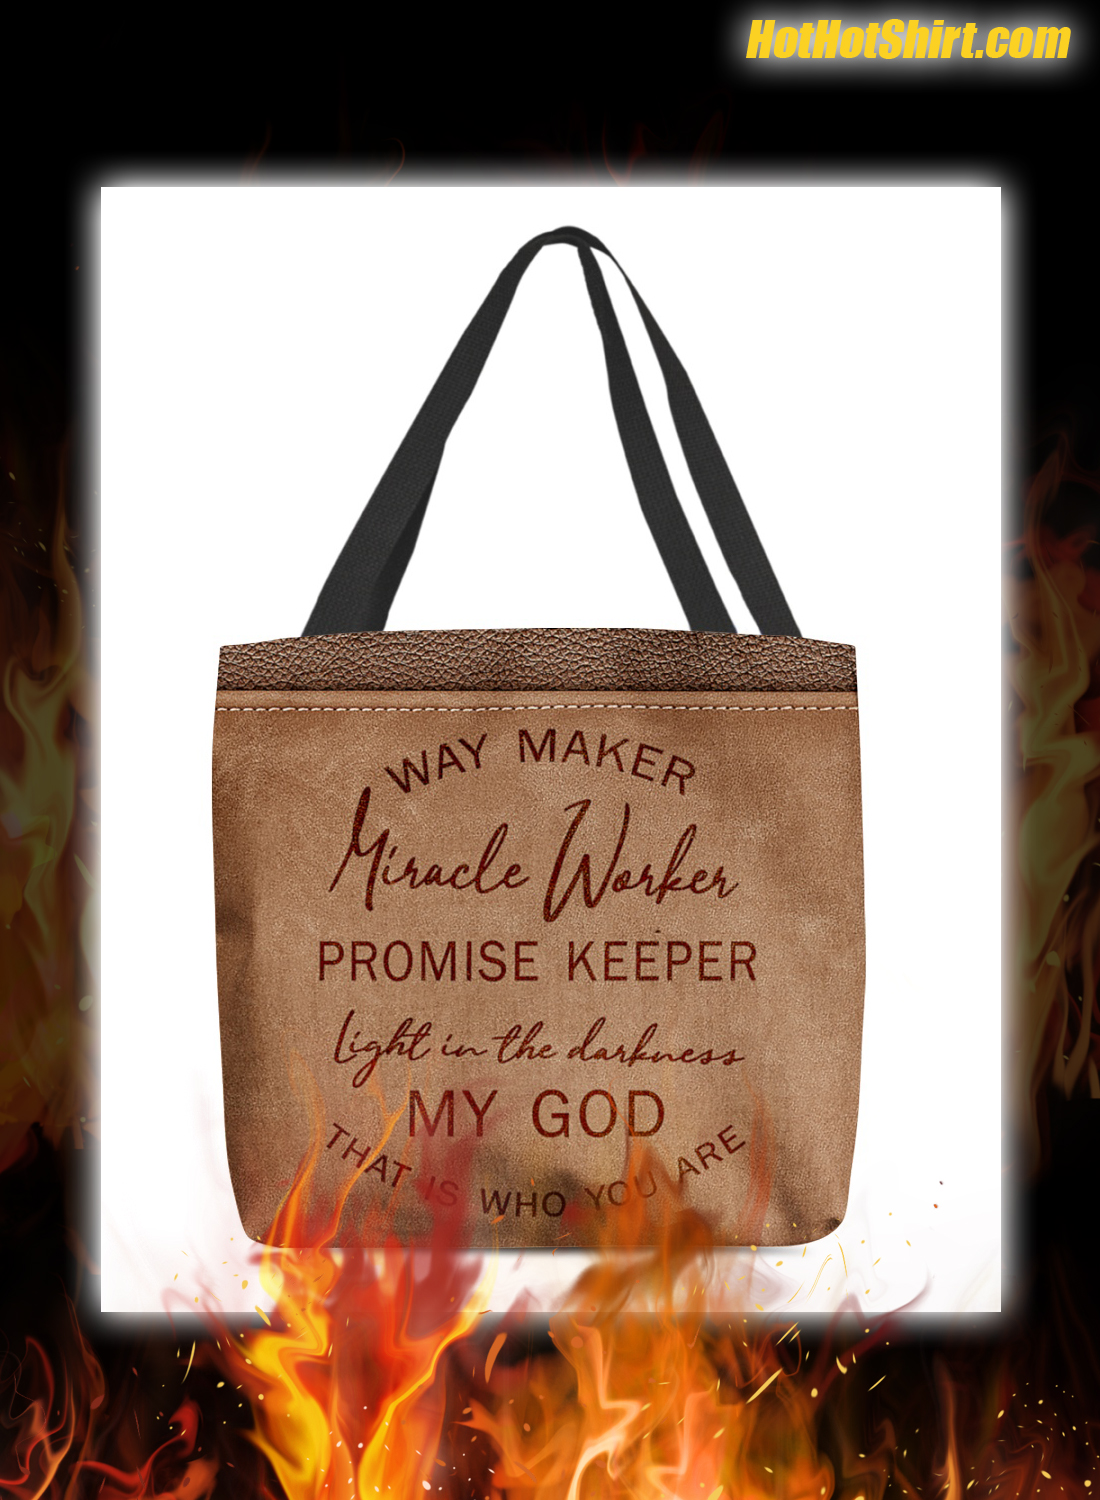 Way maker miracle worker promise keeper tote bag